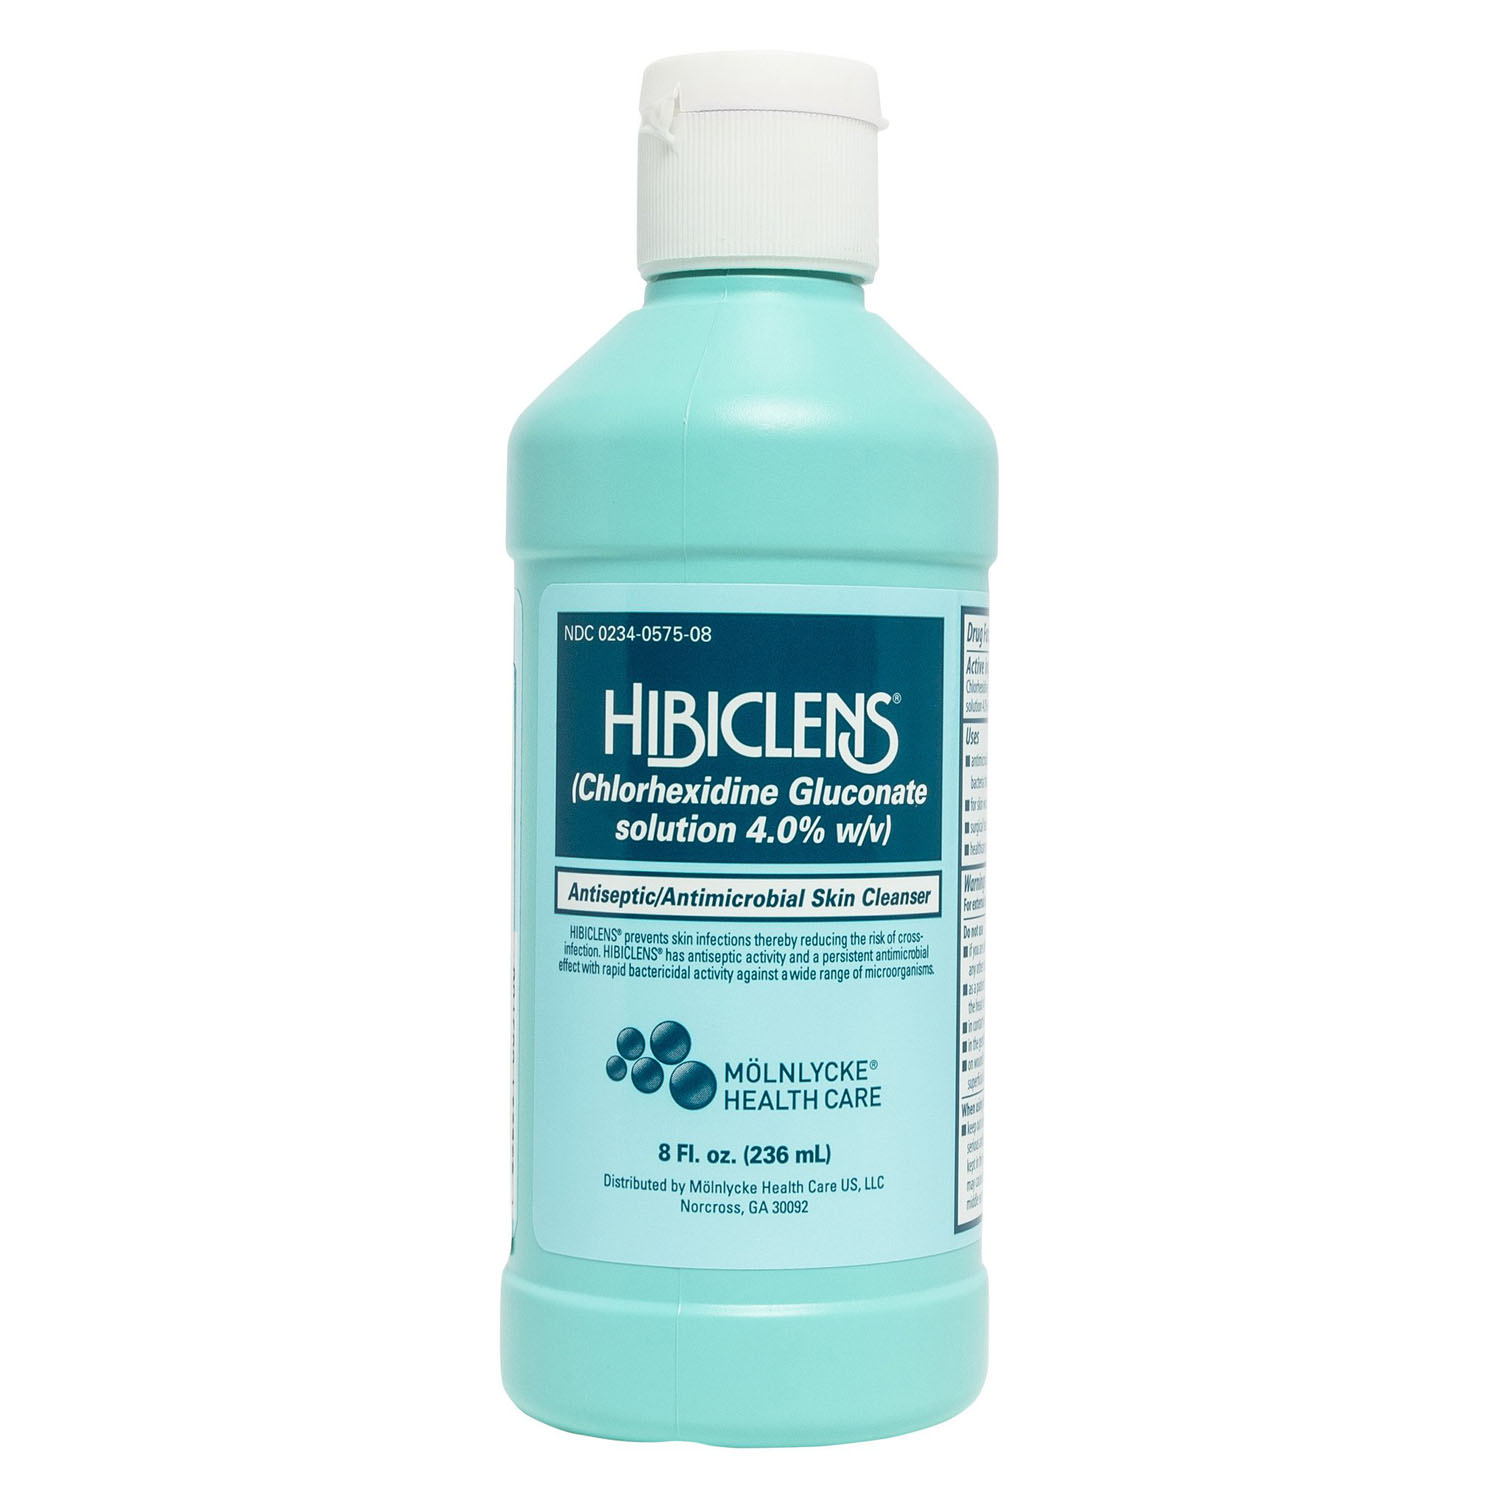 MOLNLYCKE HIBICLENS ANTISEPTIC ANTIMICROBIAL SKIN CLEANSER : 57508 EA $8.76 Stocked